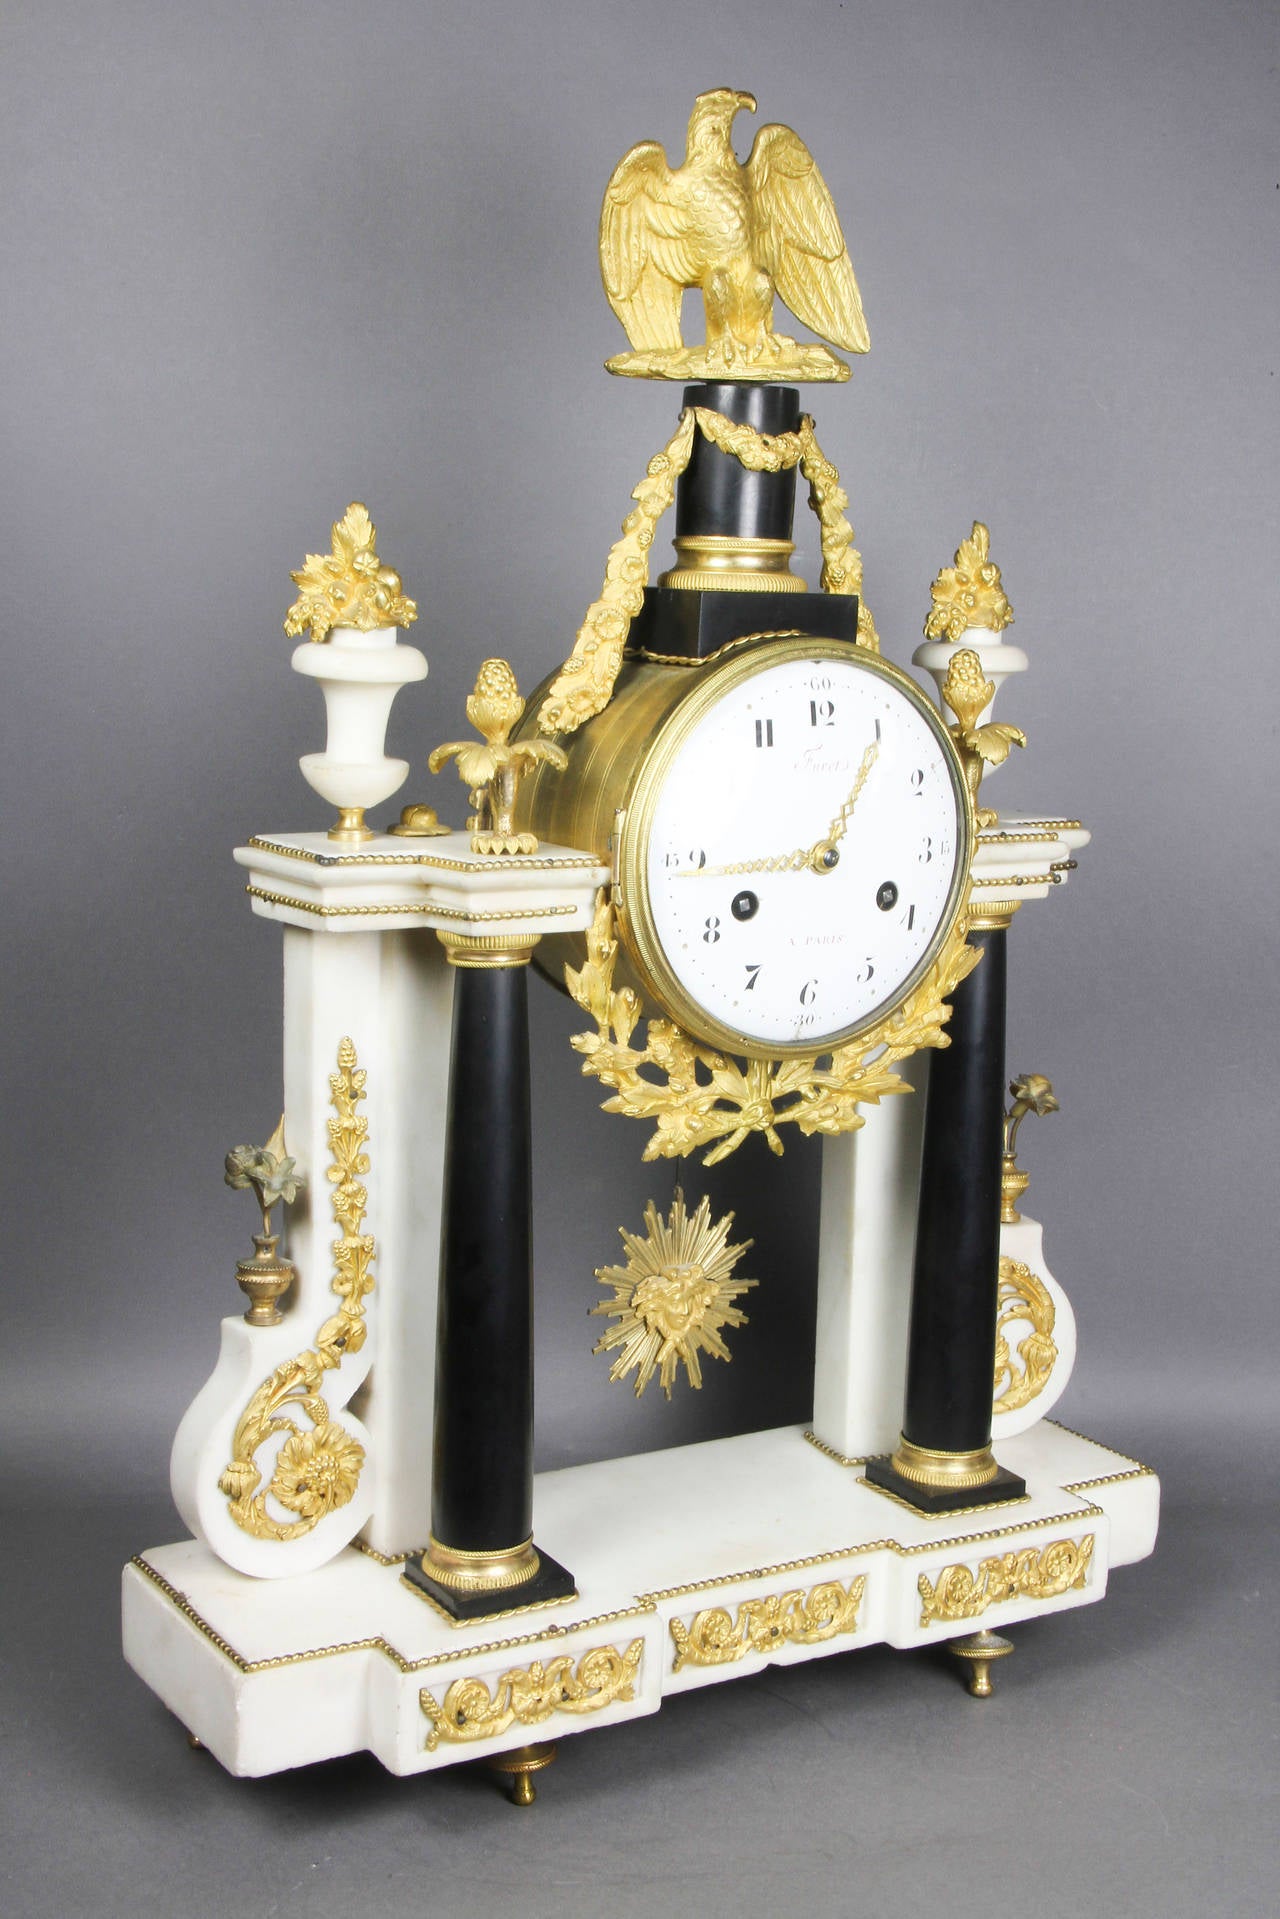 Late Louis XVI Ormolu-Mounted Black and White Marble Mantle Clock by Furet 1